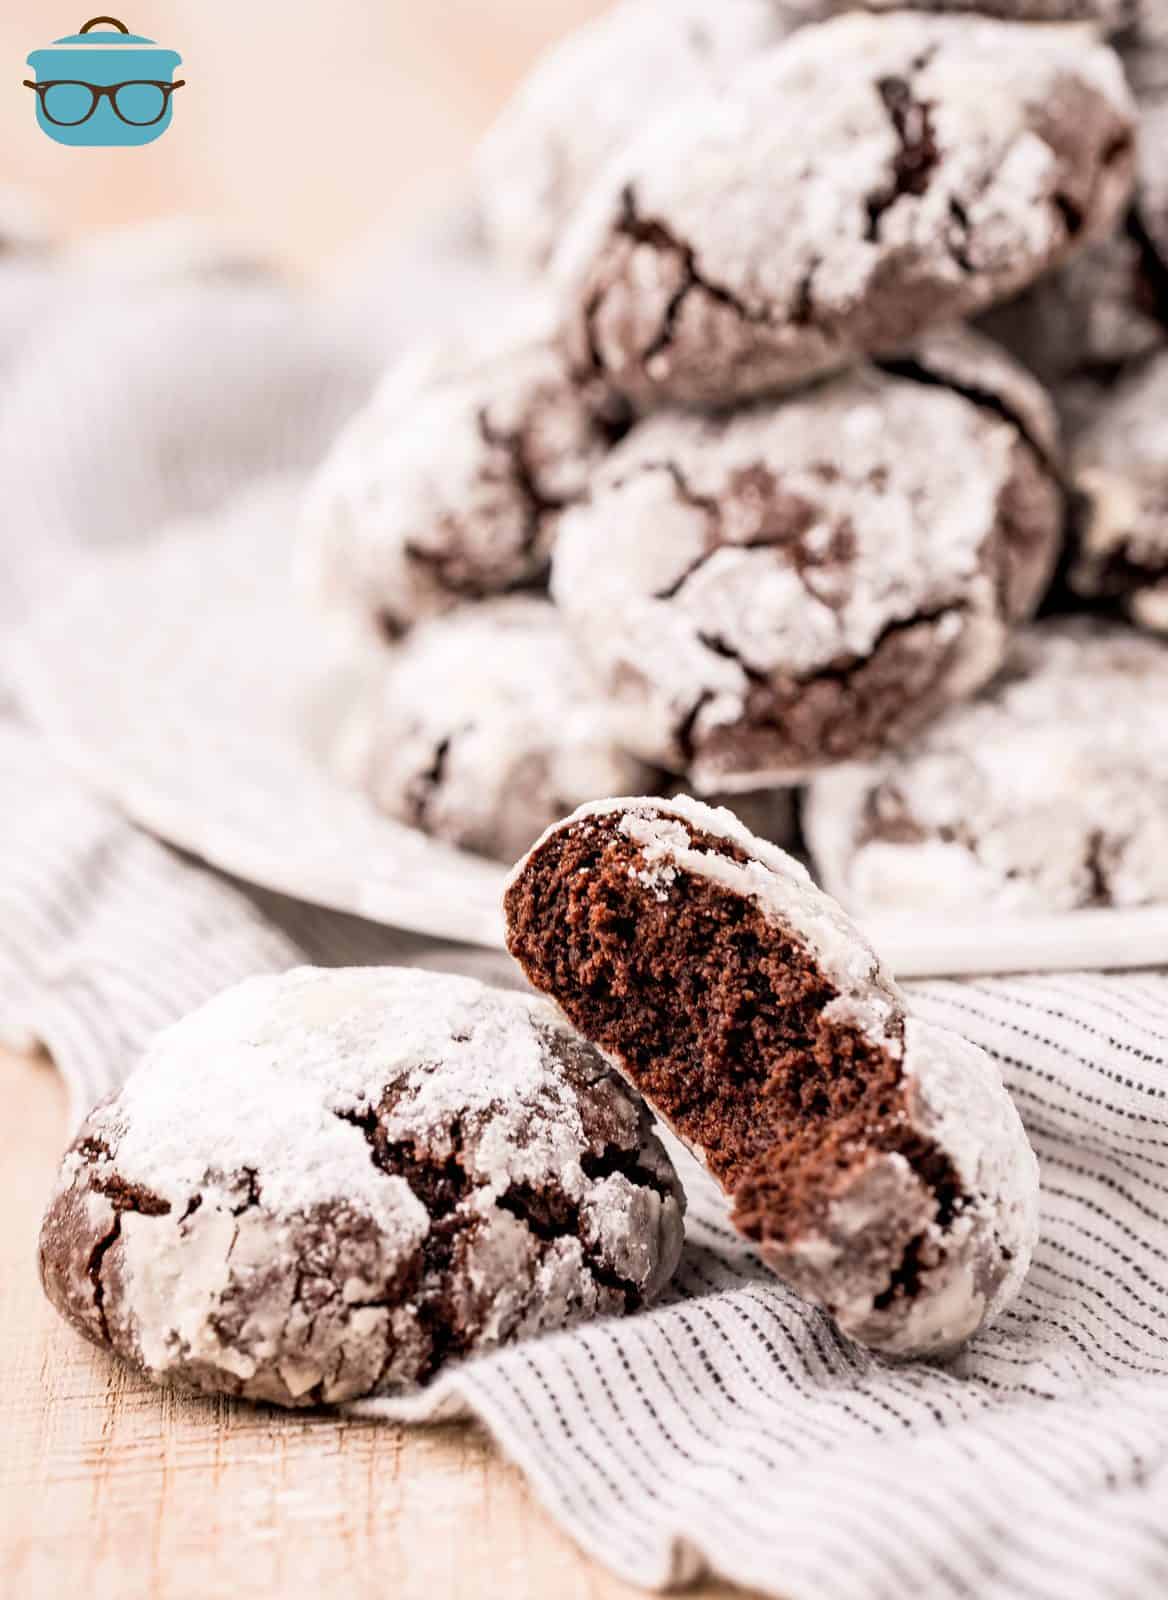 Chocolate Crinkle Cookies on linen with one leaning up against another with bite taken out.